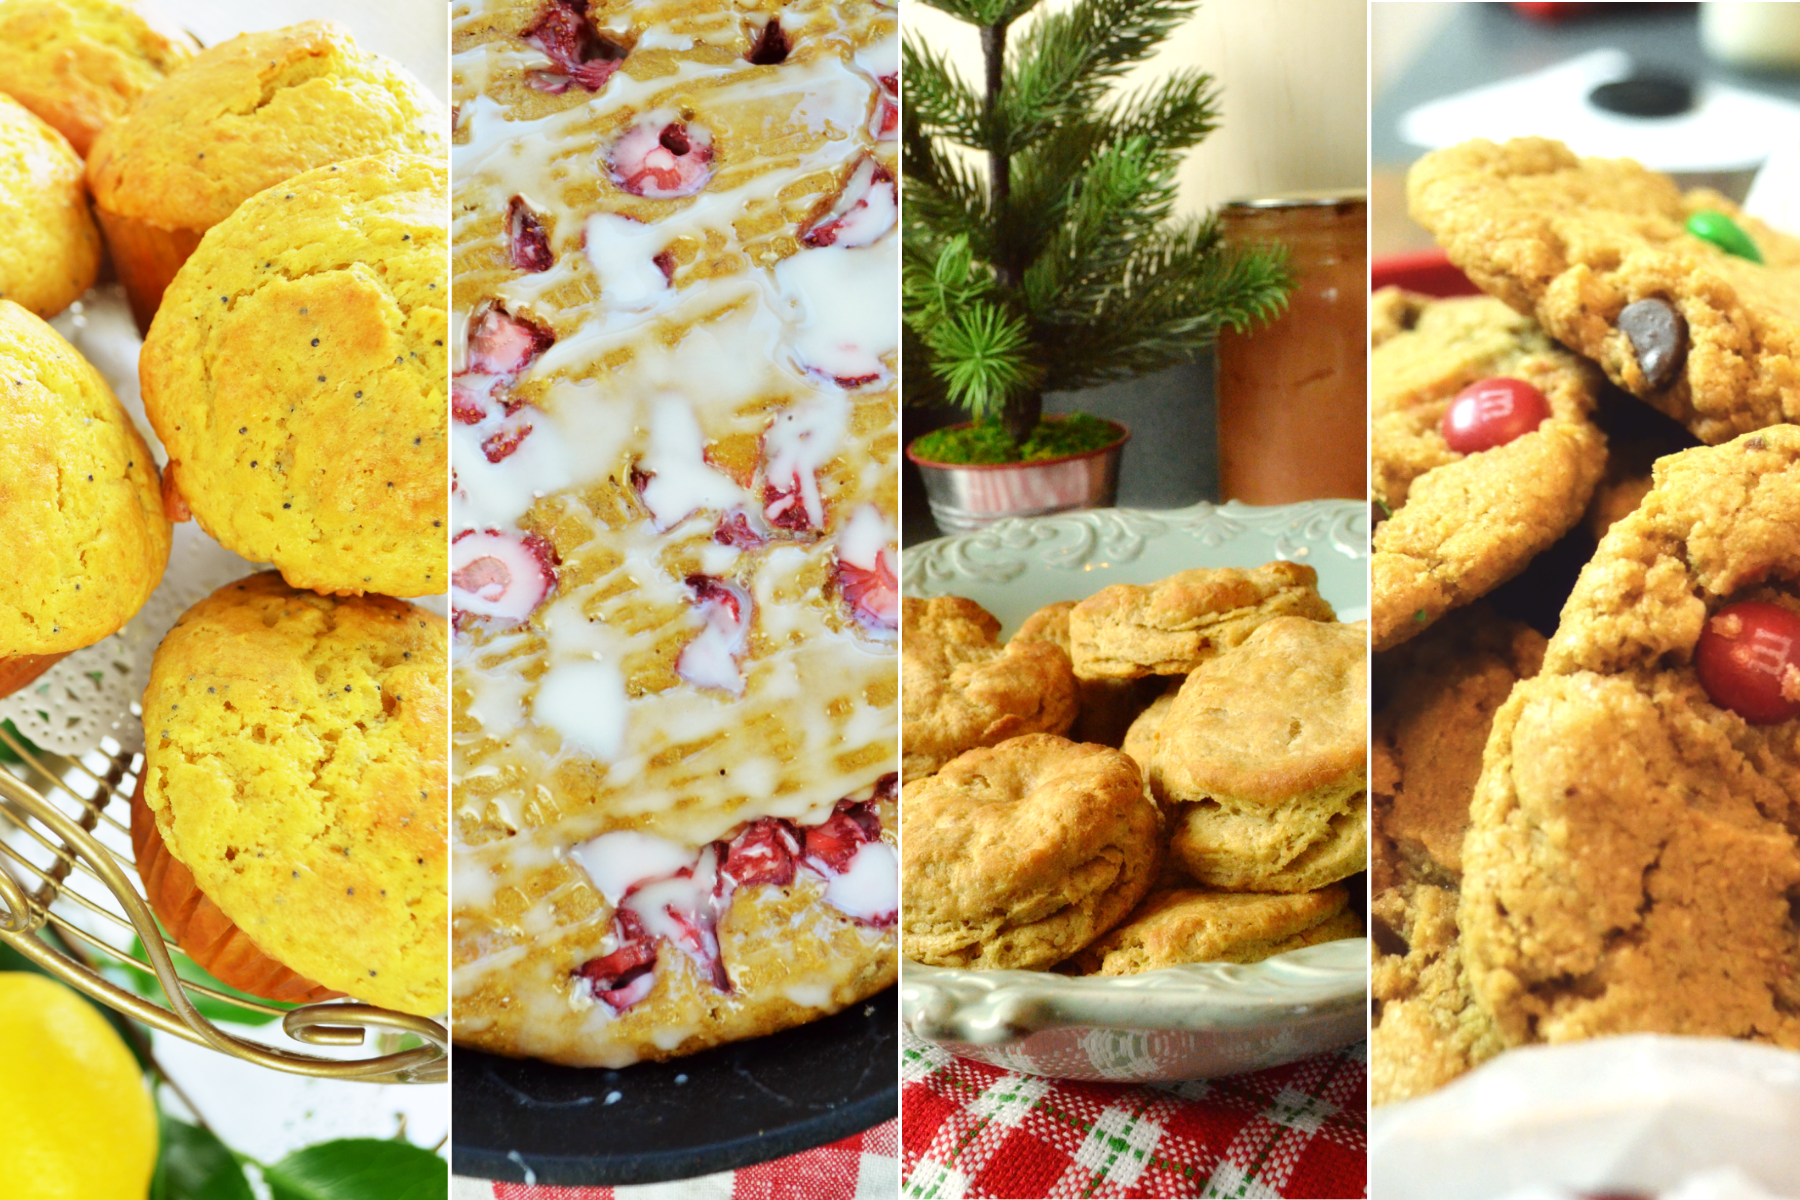 the best einkorn flour recipes include lemon poppy seed muffins, strawberry scones, buttermilk biscuits, Christmas cookies and more,